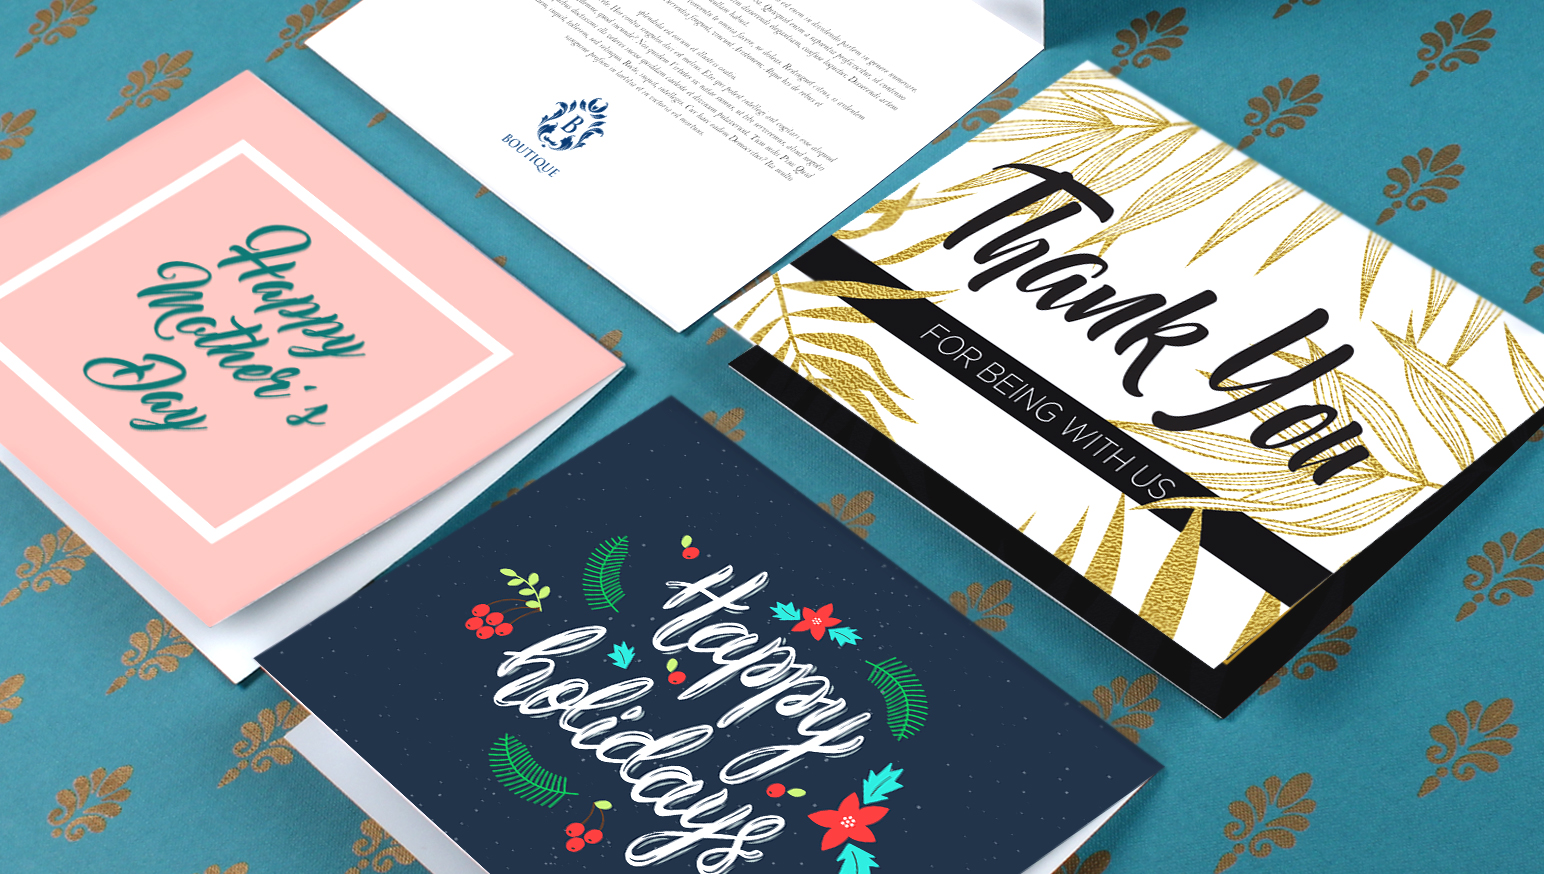 Black Owned Greeting Card Companies You Should Know - SHOPPE BLACK